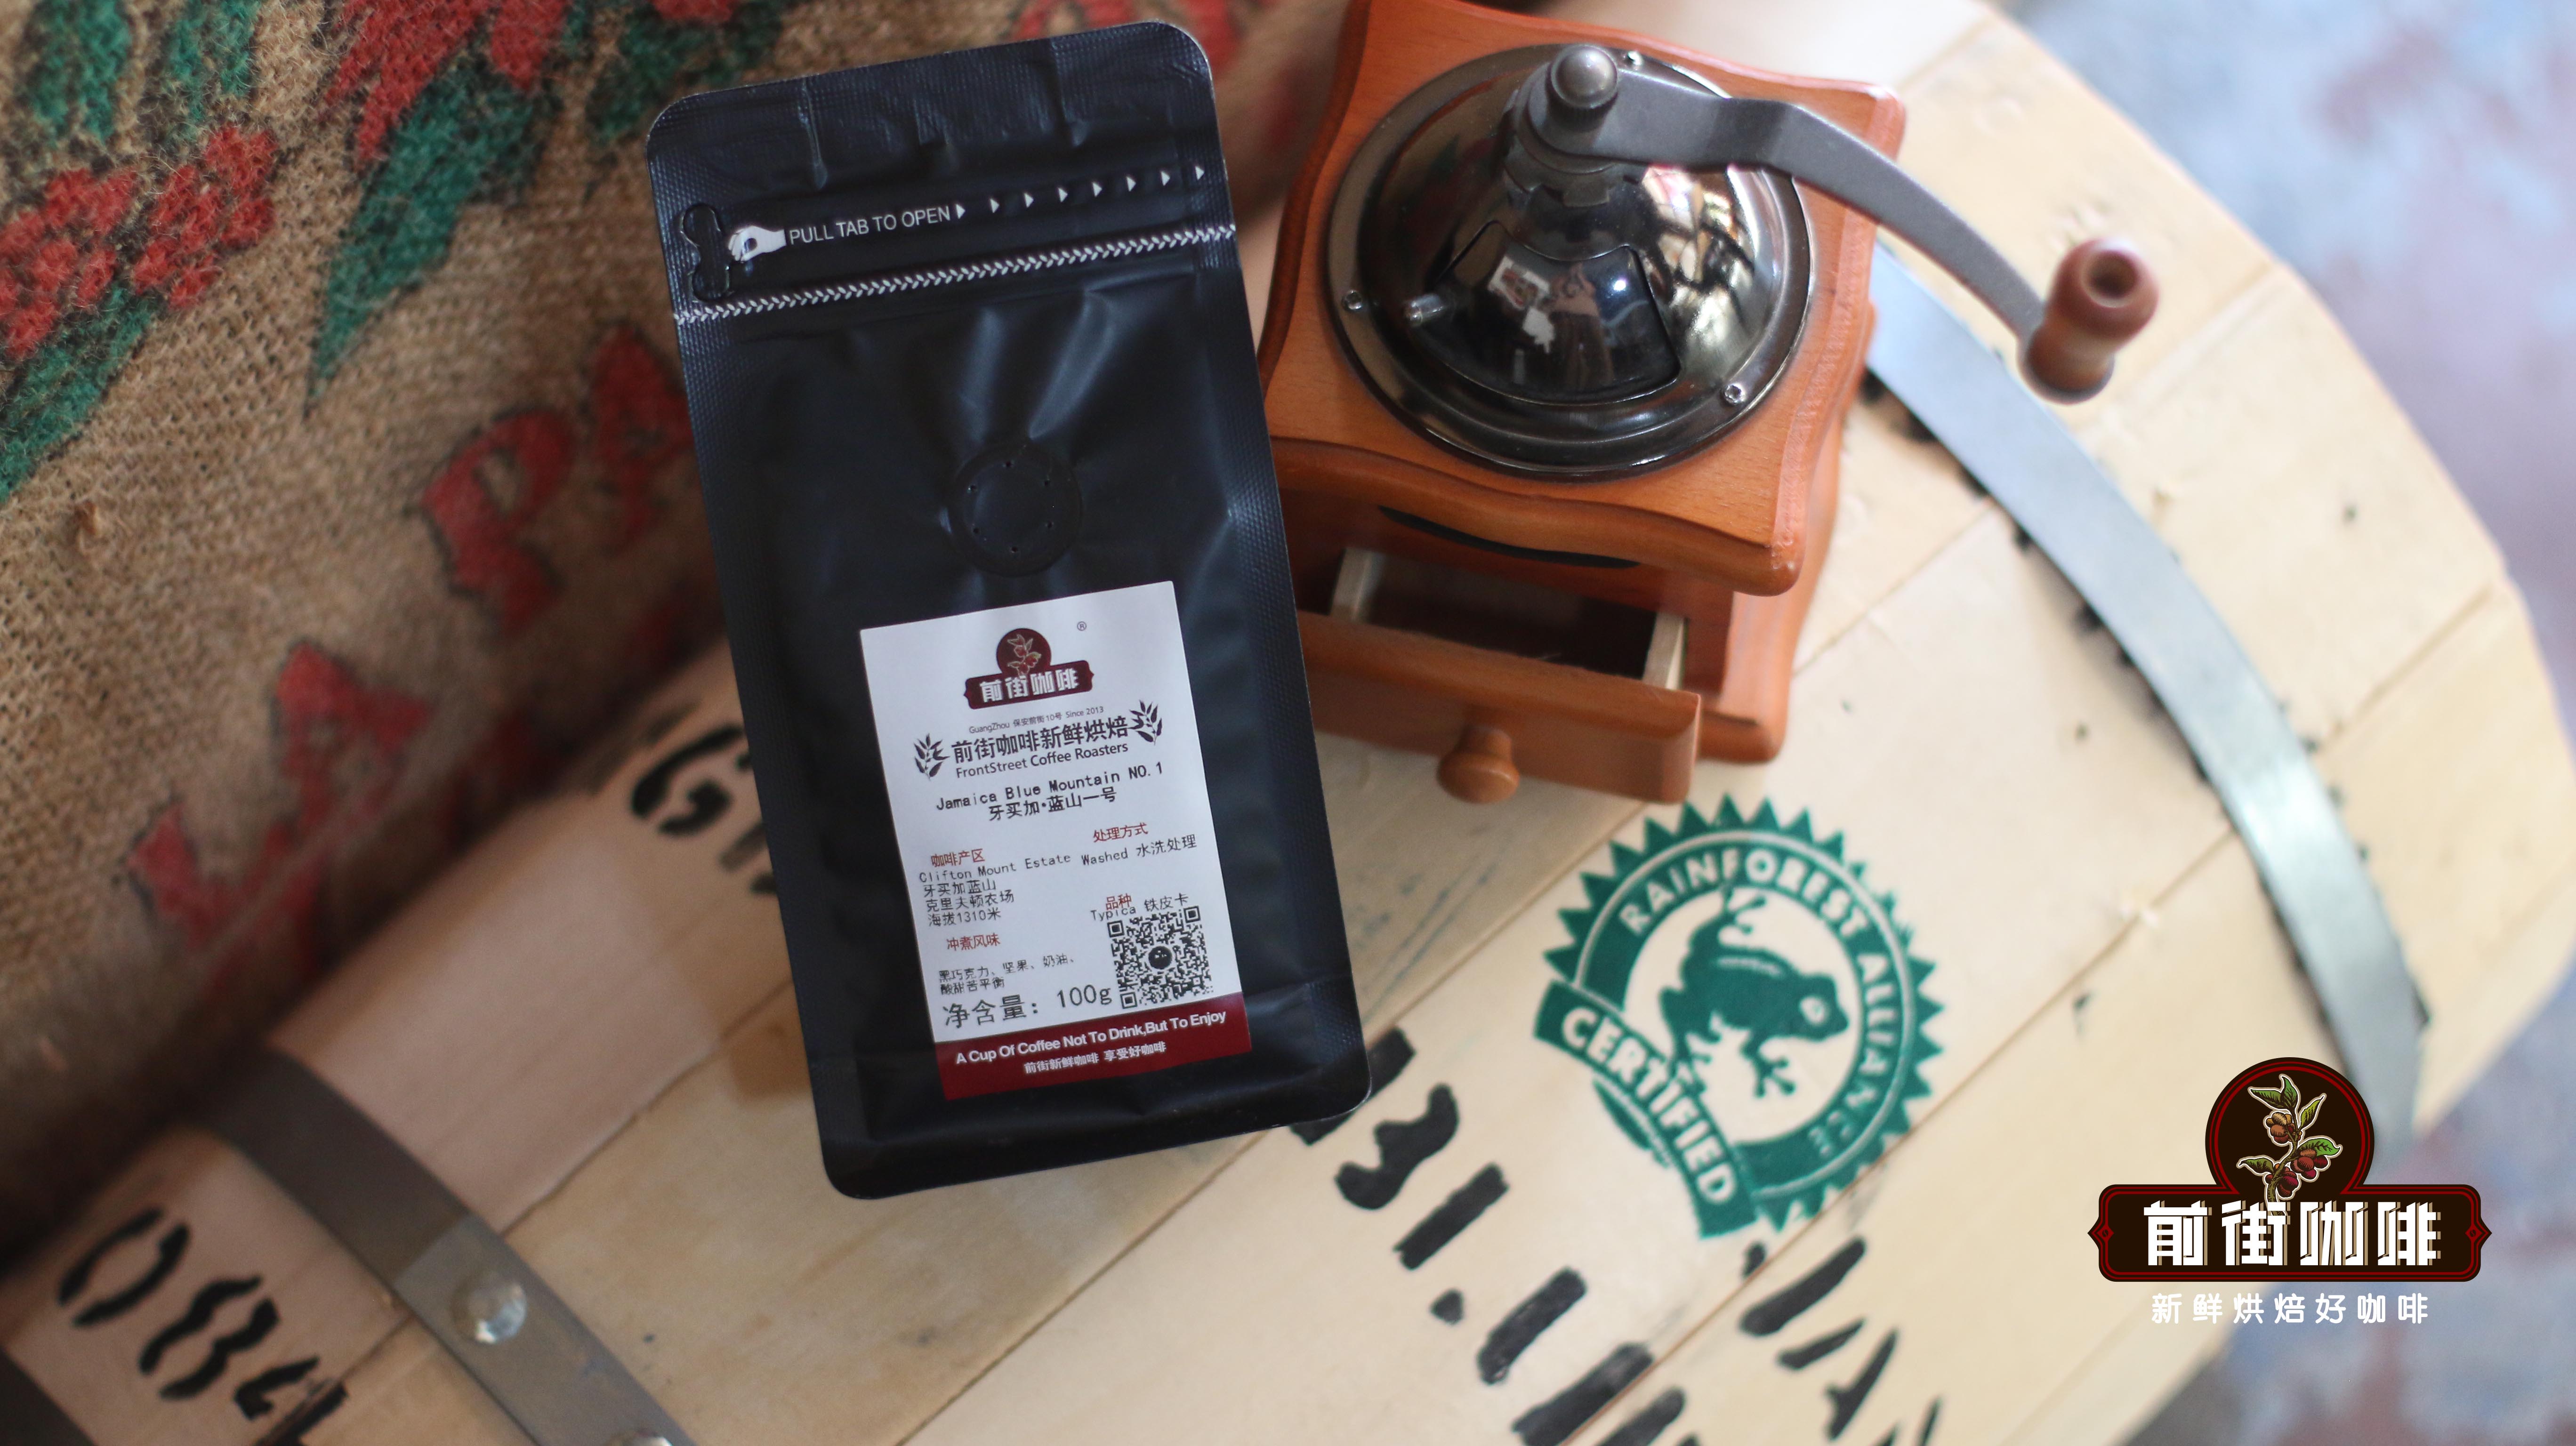 What grade does the taste of Jamaica boutique coffee beans-Blue Mountain Coffee (Blue Mountain Coffee) belong to?